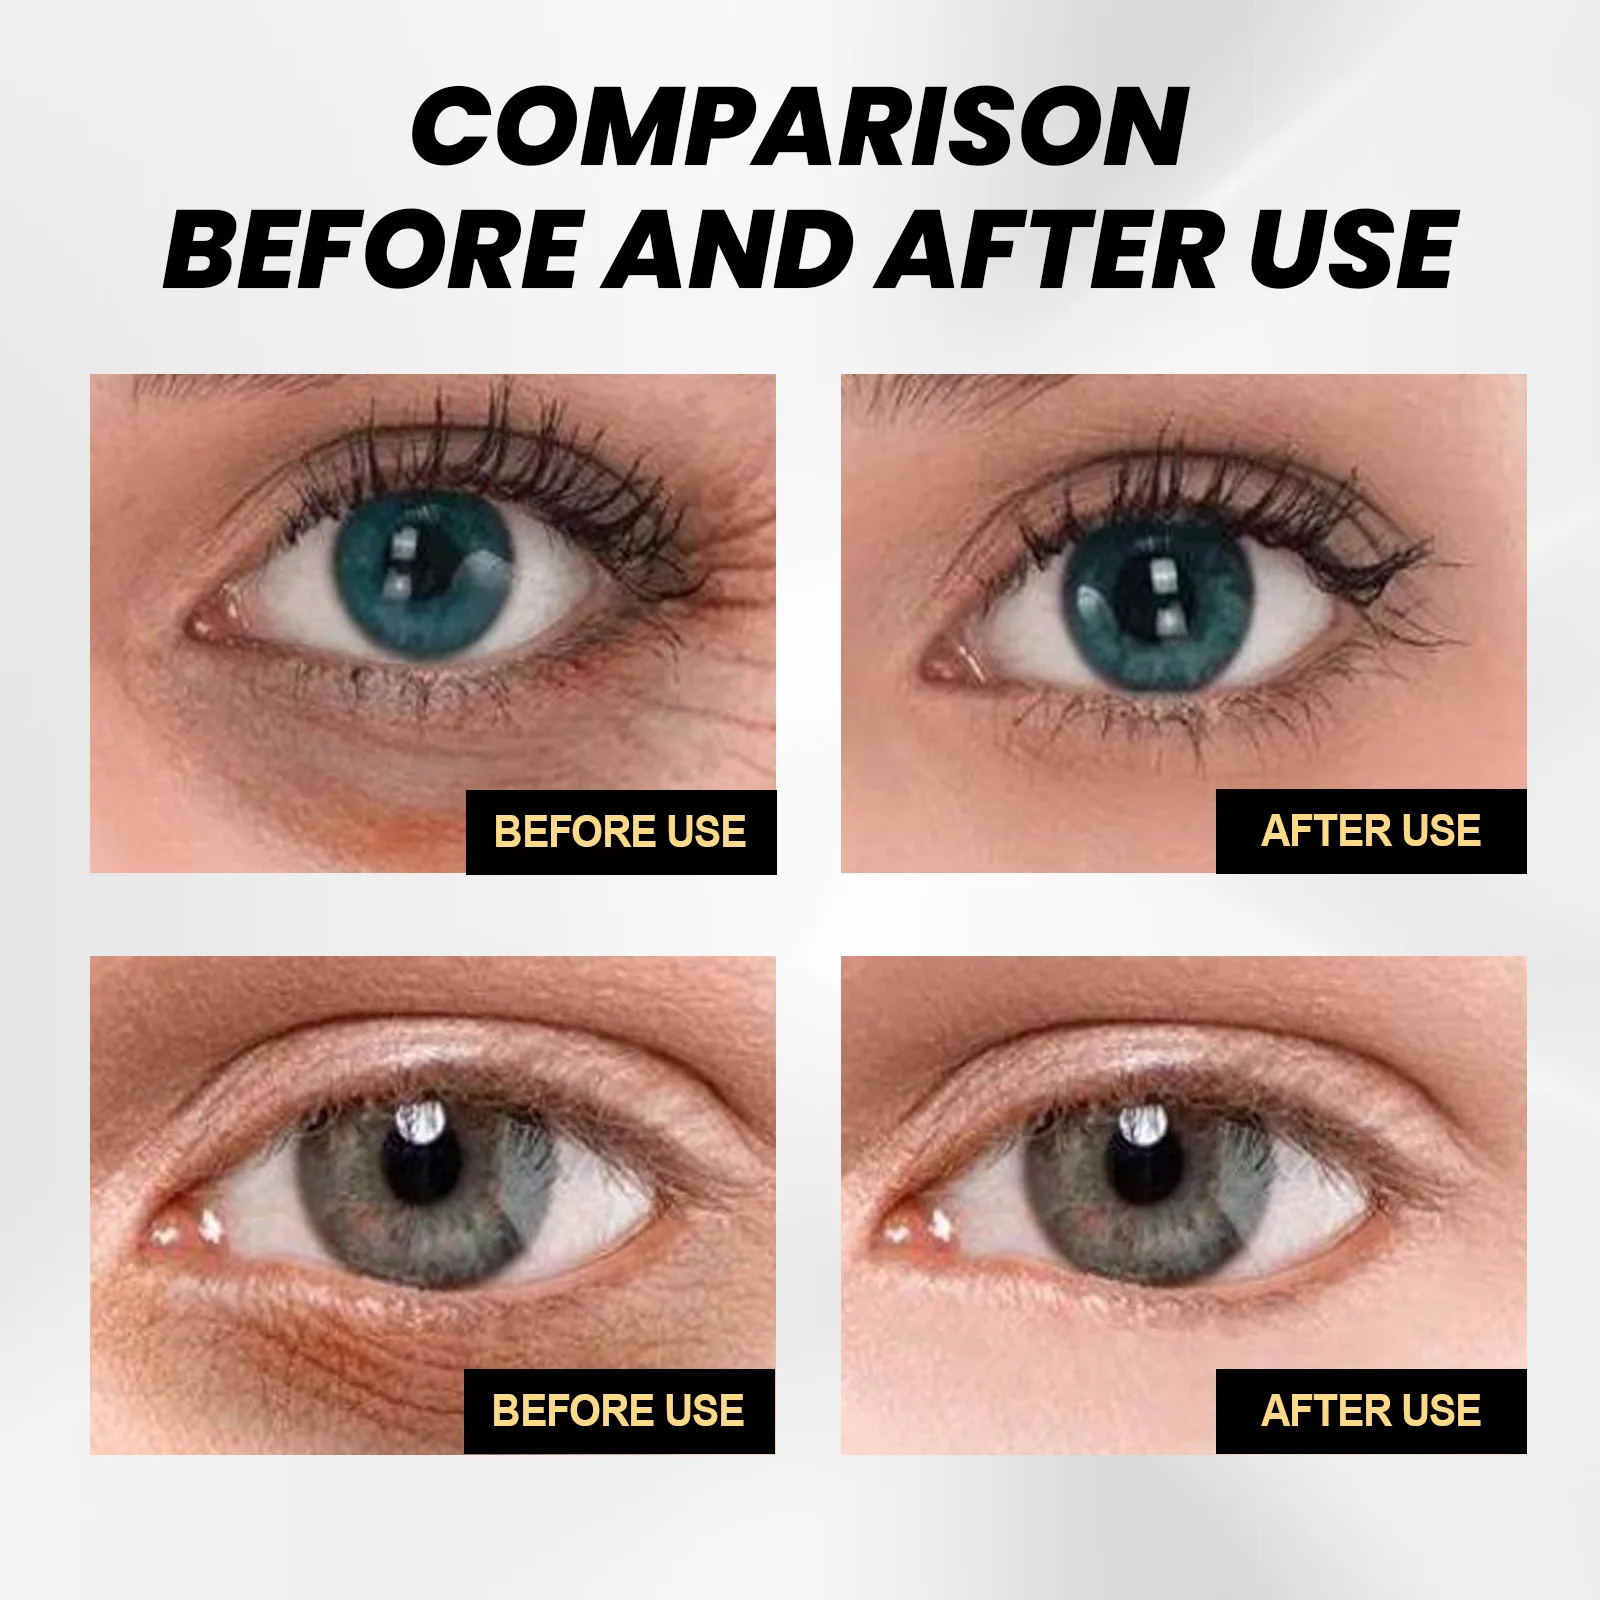 Visible reduction in fine lines and wrinkles around the eyes after using EELHOE Anti Wrinkle Eye Cream